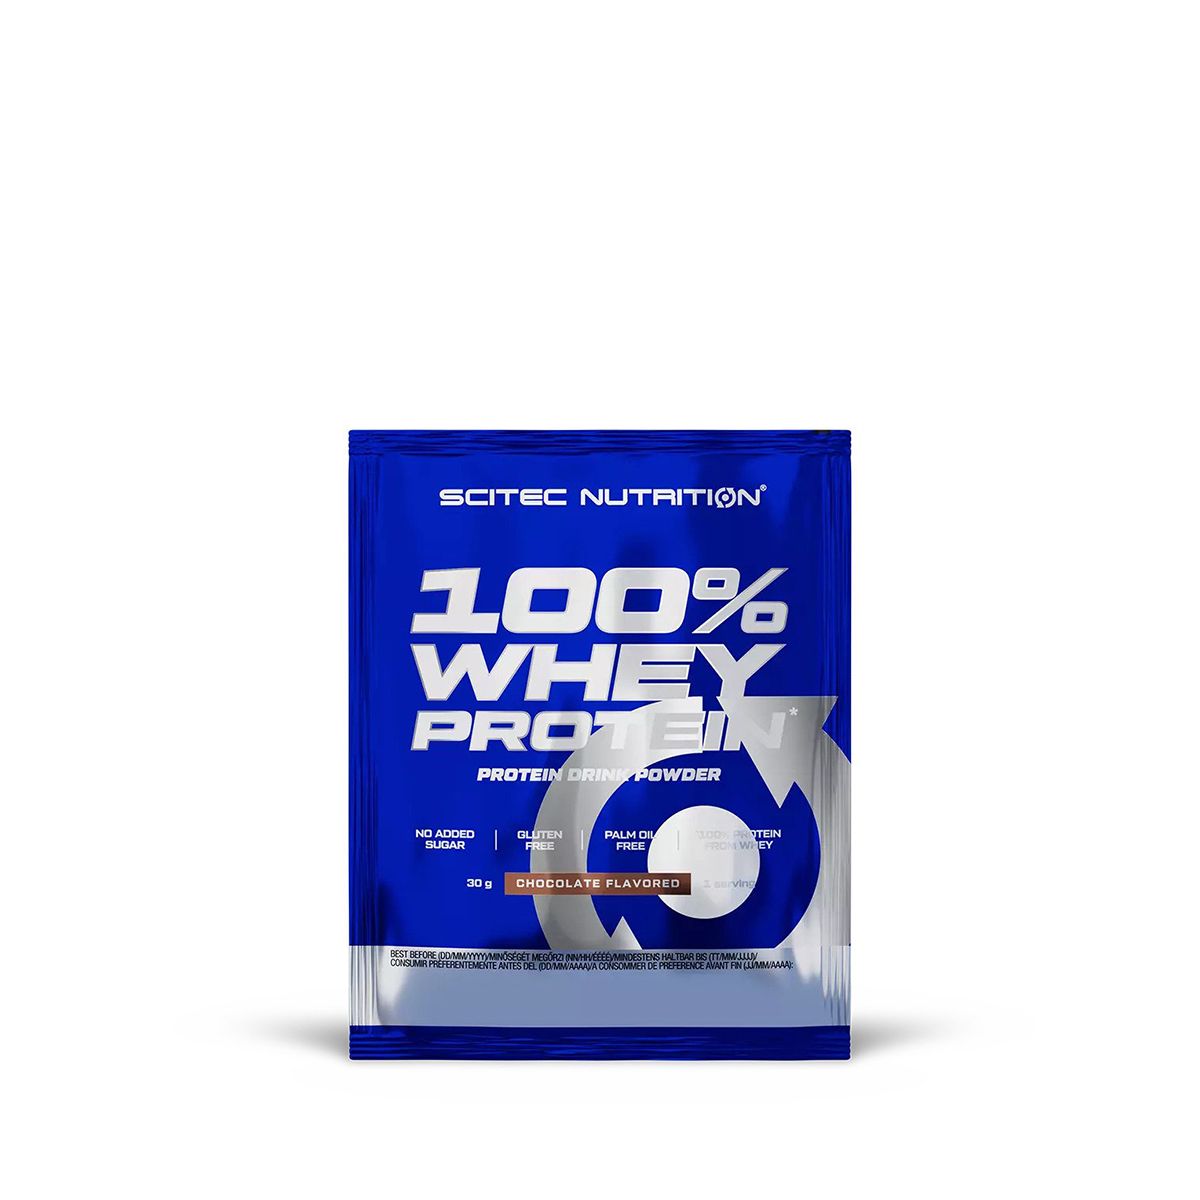 SCITEC NUTRITION - 100% WHEY PROTEIN - 30 G